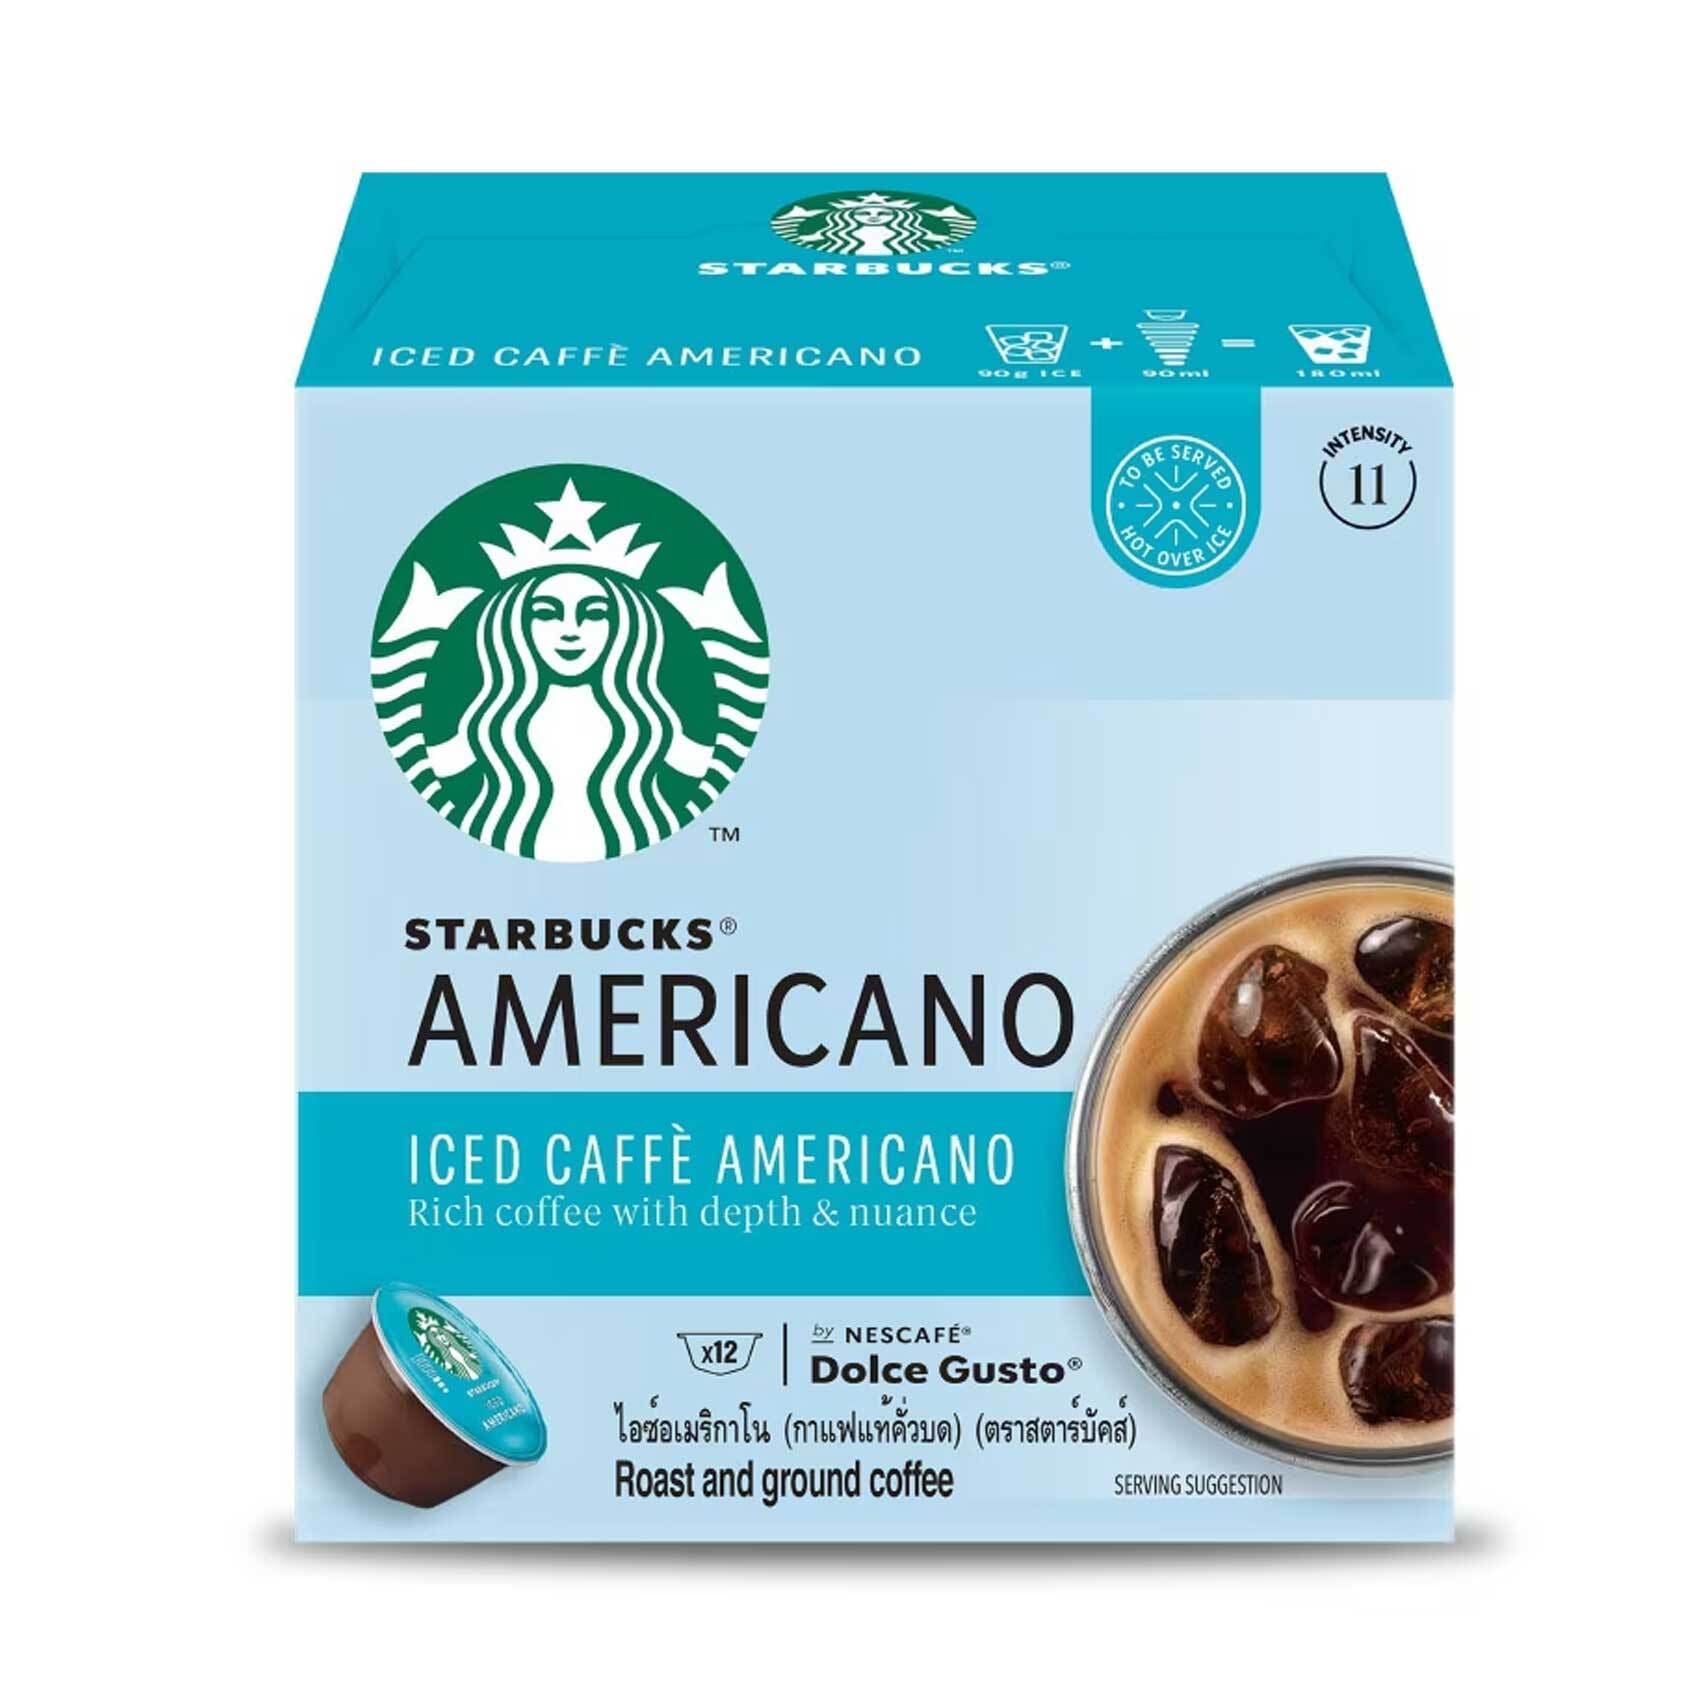 Starbucks Coffee by Nescafe Dolce Gusto, Starbucks Caramel Macchiato,  Coffee Pods, 12 capsules, Pack of 3 (Packaging May Vary)